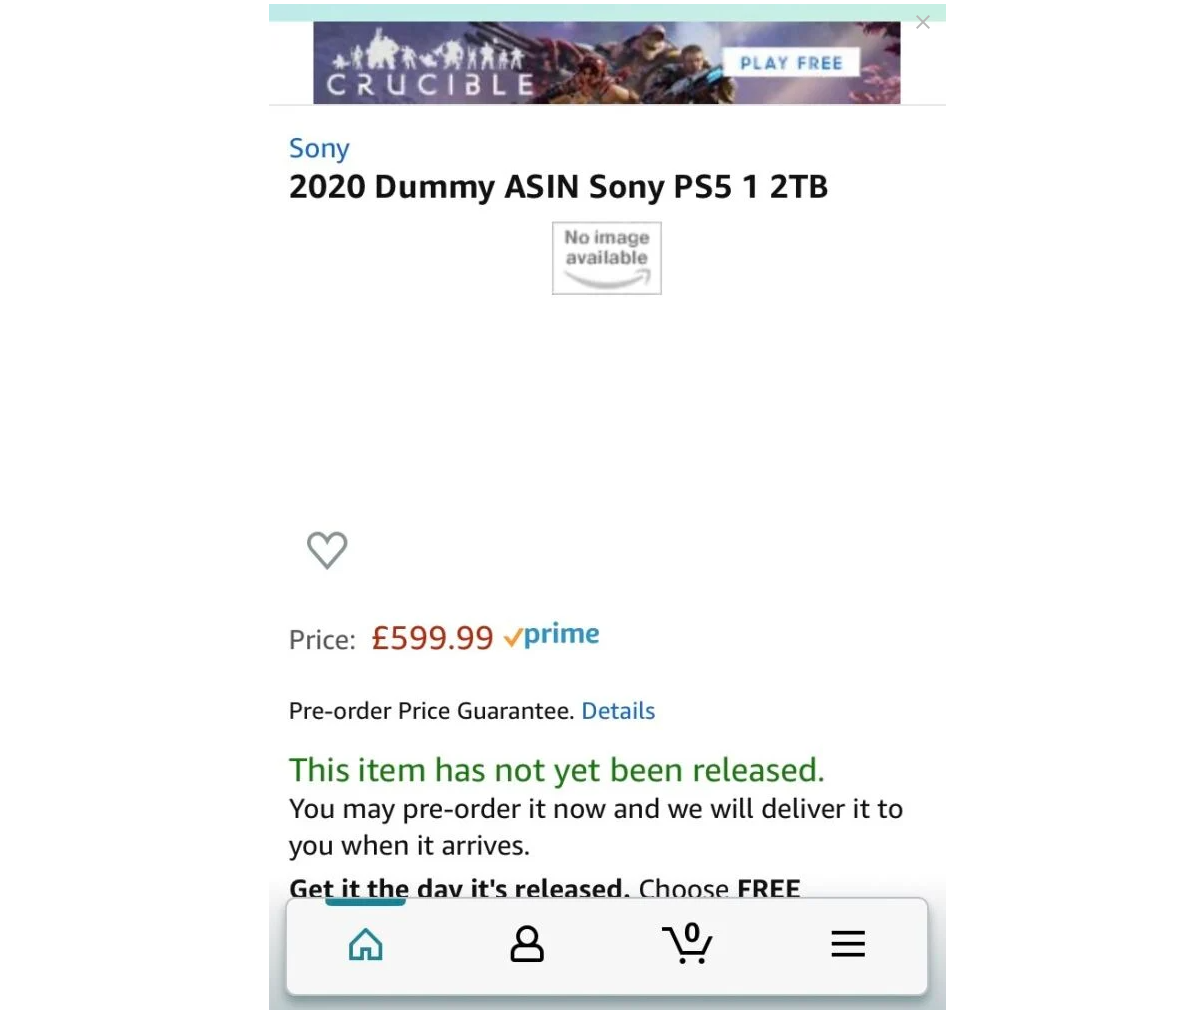 playstation 5 leaked price